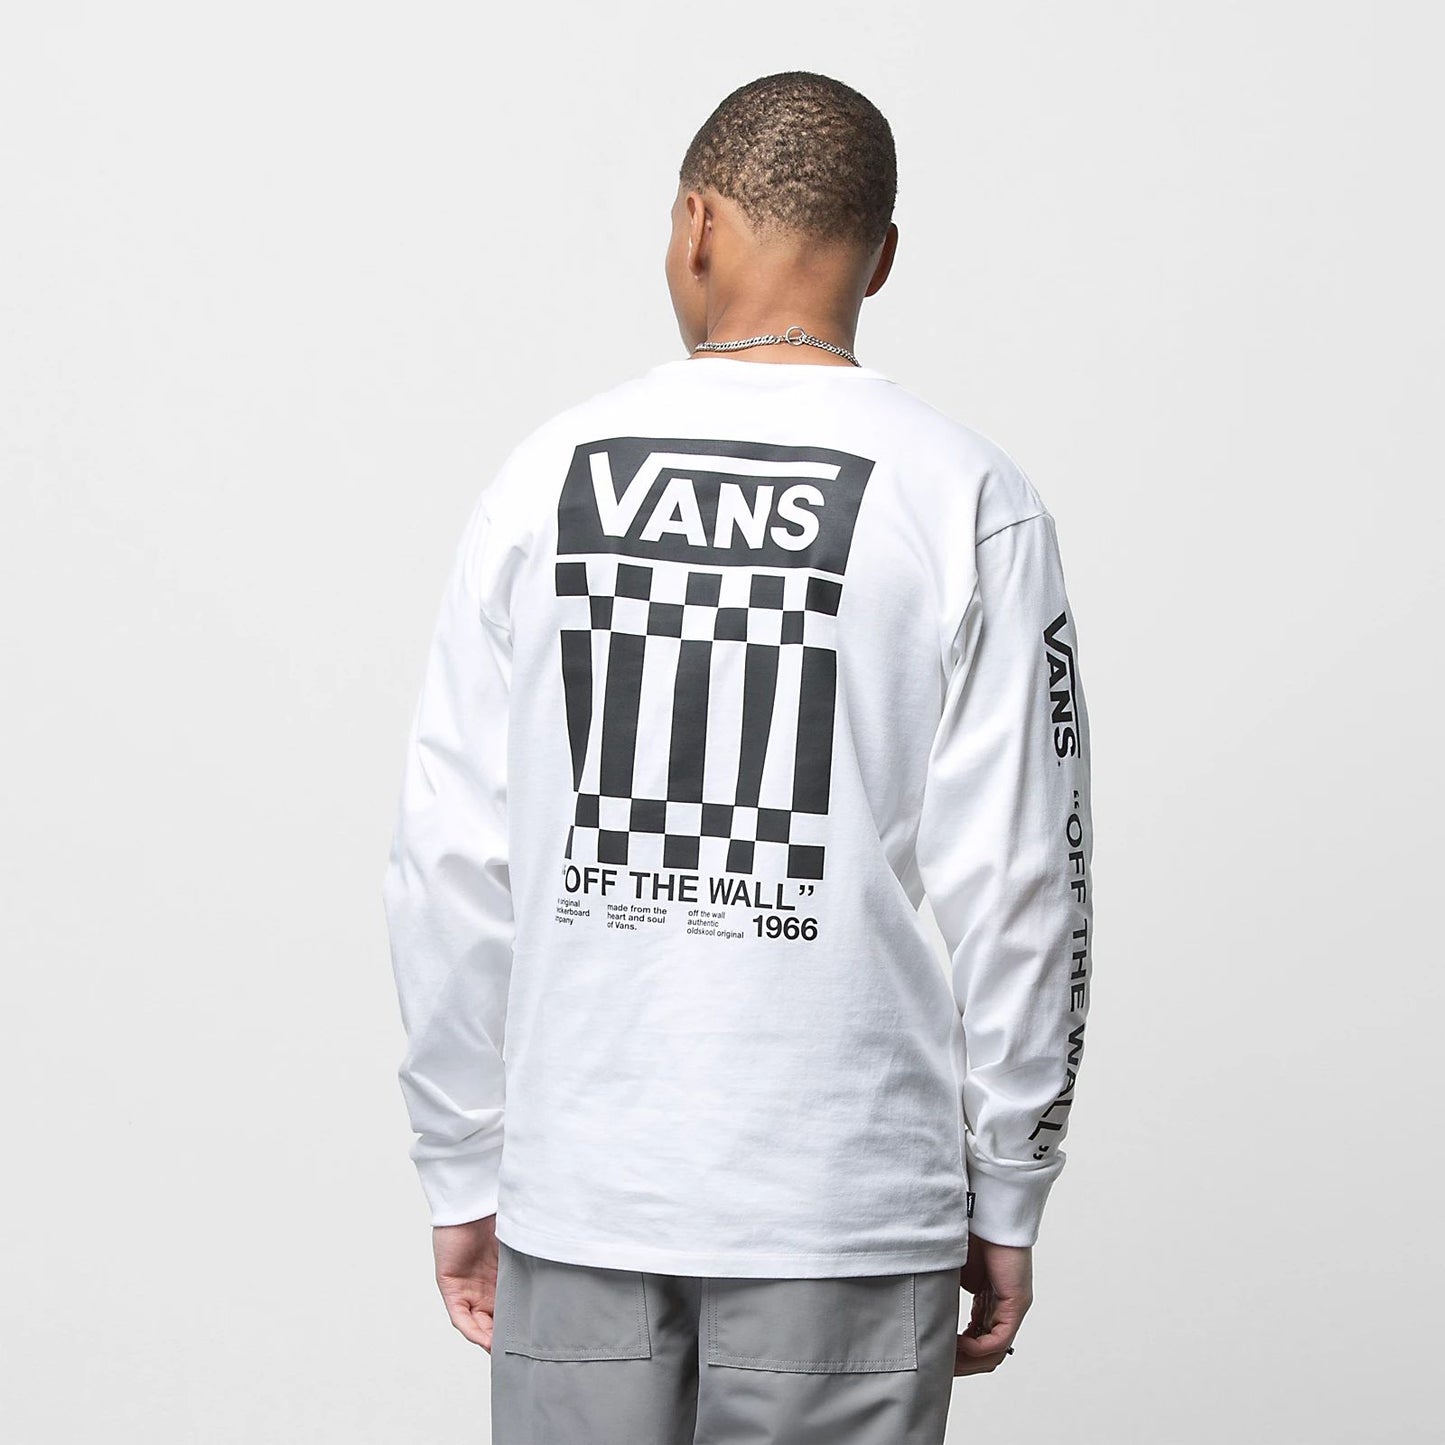 Off The Wall Check Graphic Long Sleeve Tee Shirt